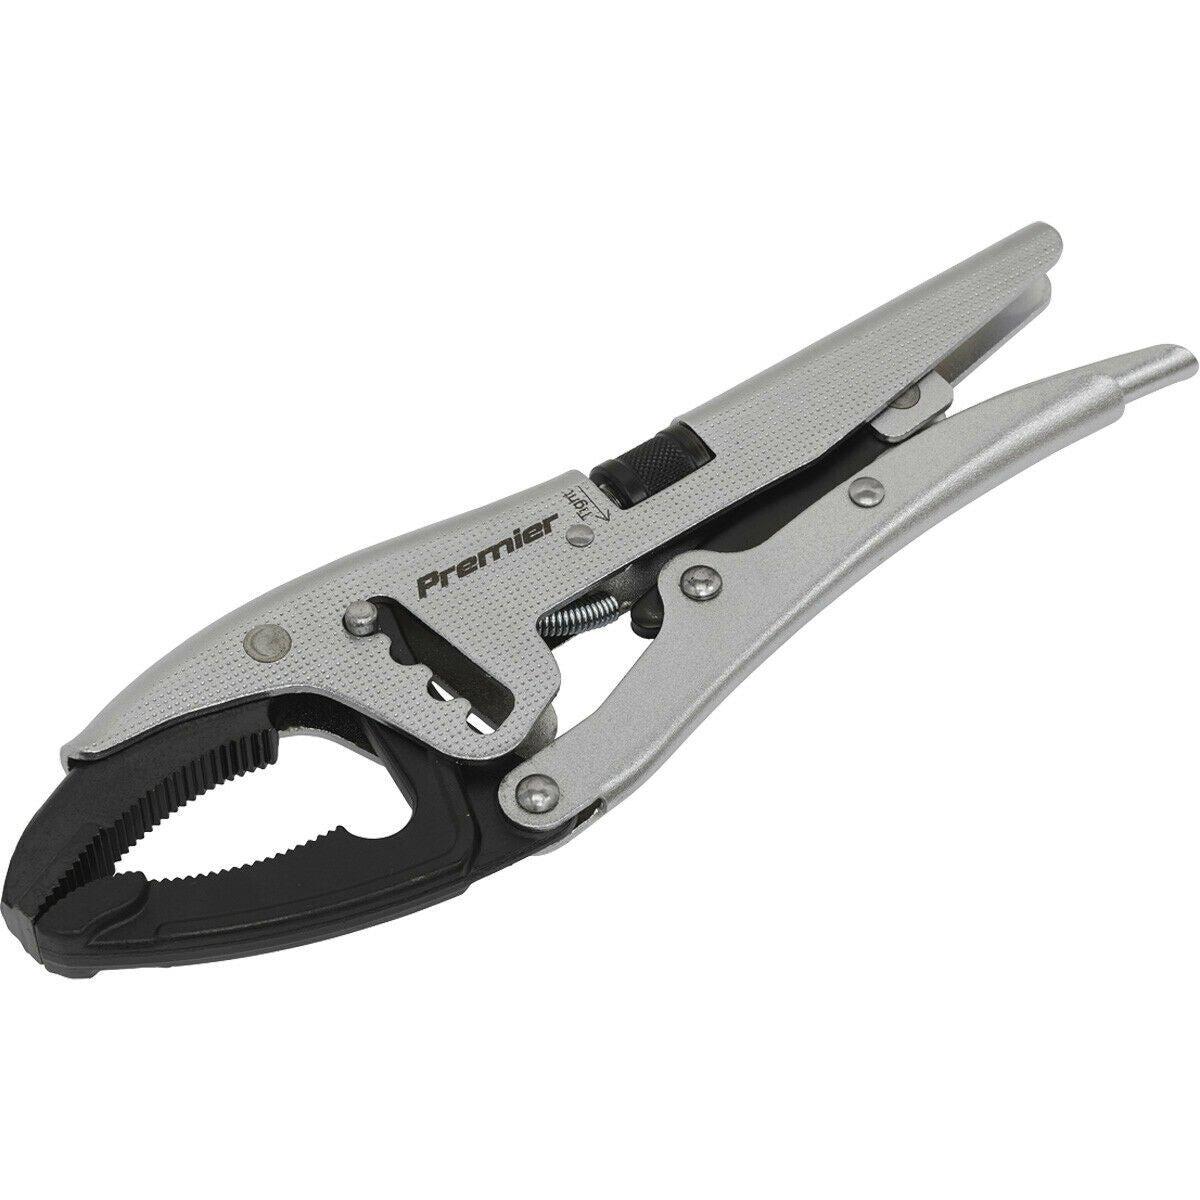 250mm Extra-Wide Opening Locking Pliers - 90mm Jaw Capacity - Chrome Molybdenum